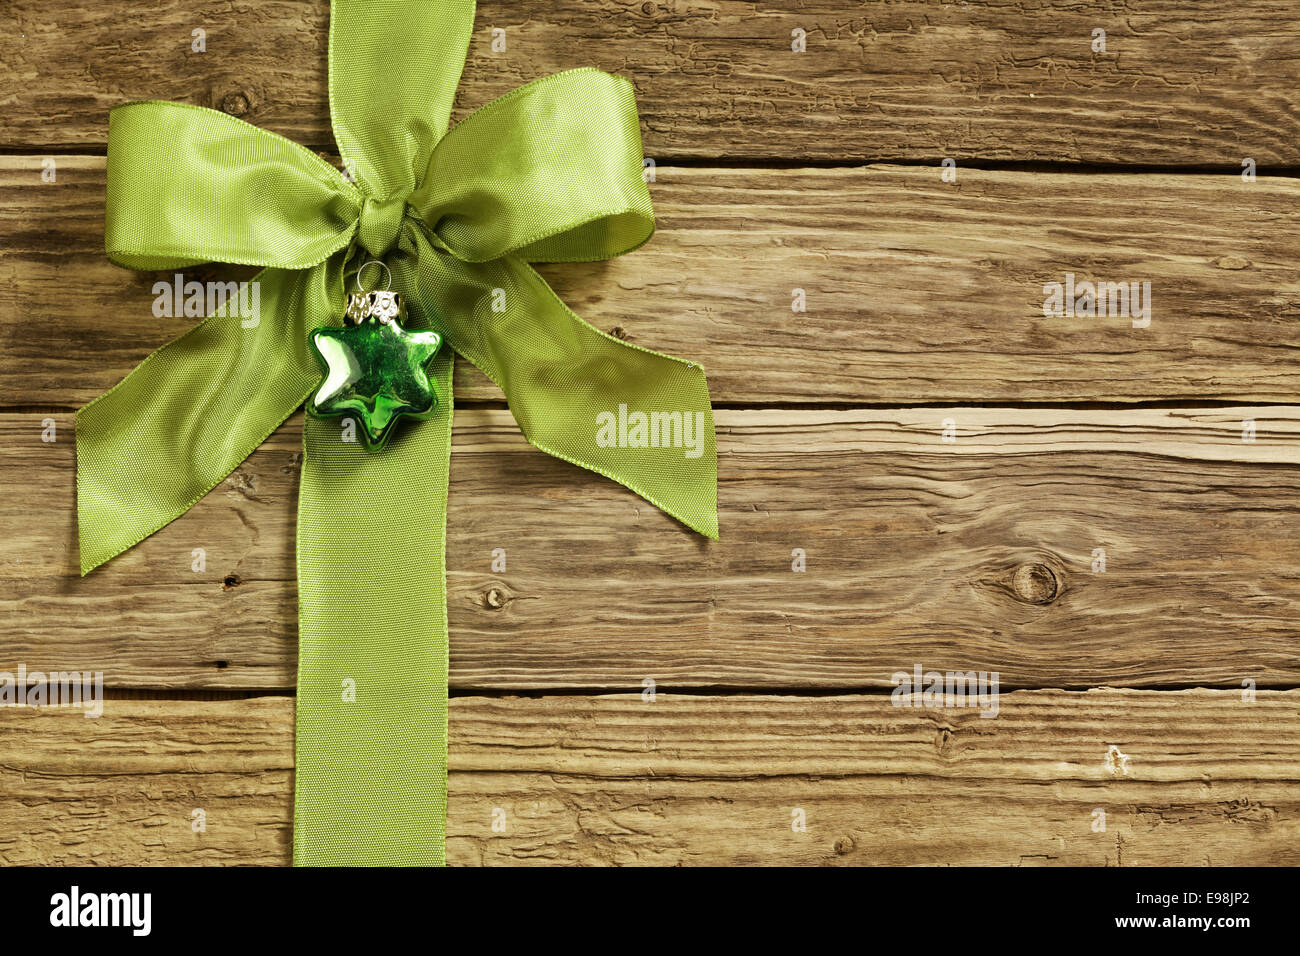 Stylish green ribbon and heart decoration tied in an ornamental bow on textured rustic wooden boards for your Xmas greeting or seasonal message Stock Photo